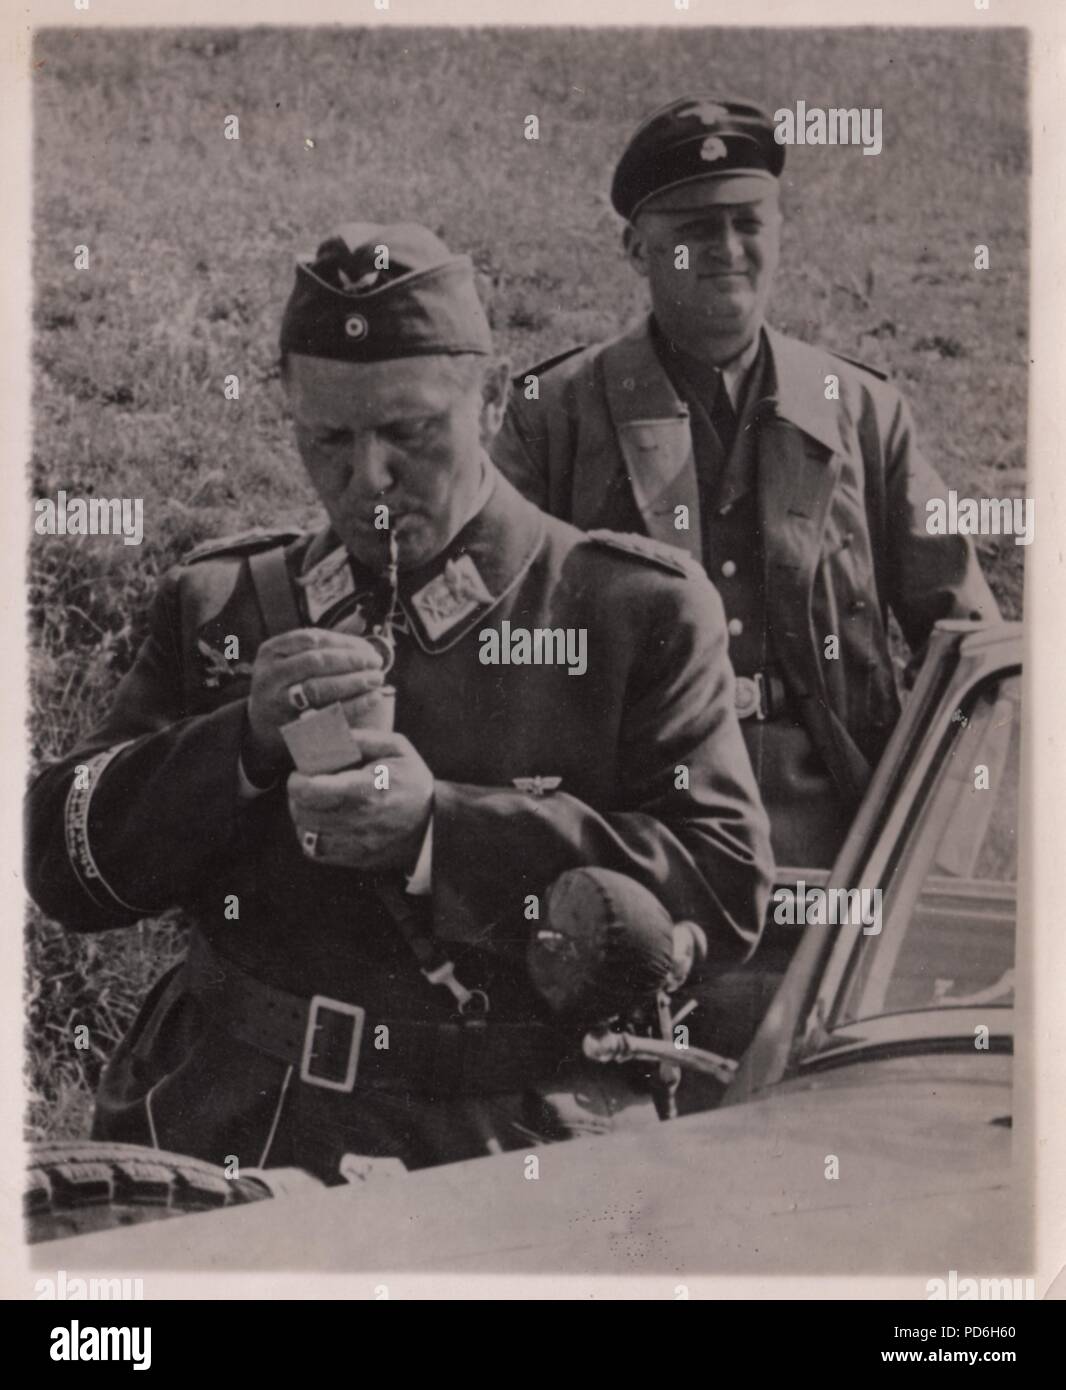 Image from the photo album of Oberleutnant Oscar Müller of  Kampfgeschwader 1: During a visit to II. Gruppe, Kampfgeschwader 1, Reichsmarschall Hermann Göring lights up his pipe, while his SS driver holds the car door. Summer 1940 Stock Photo